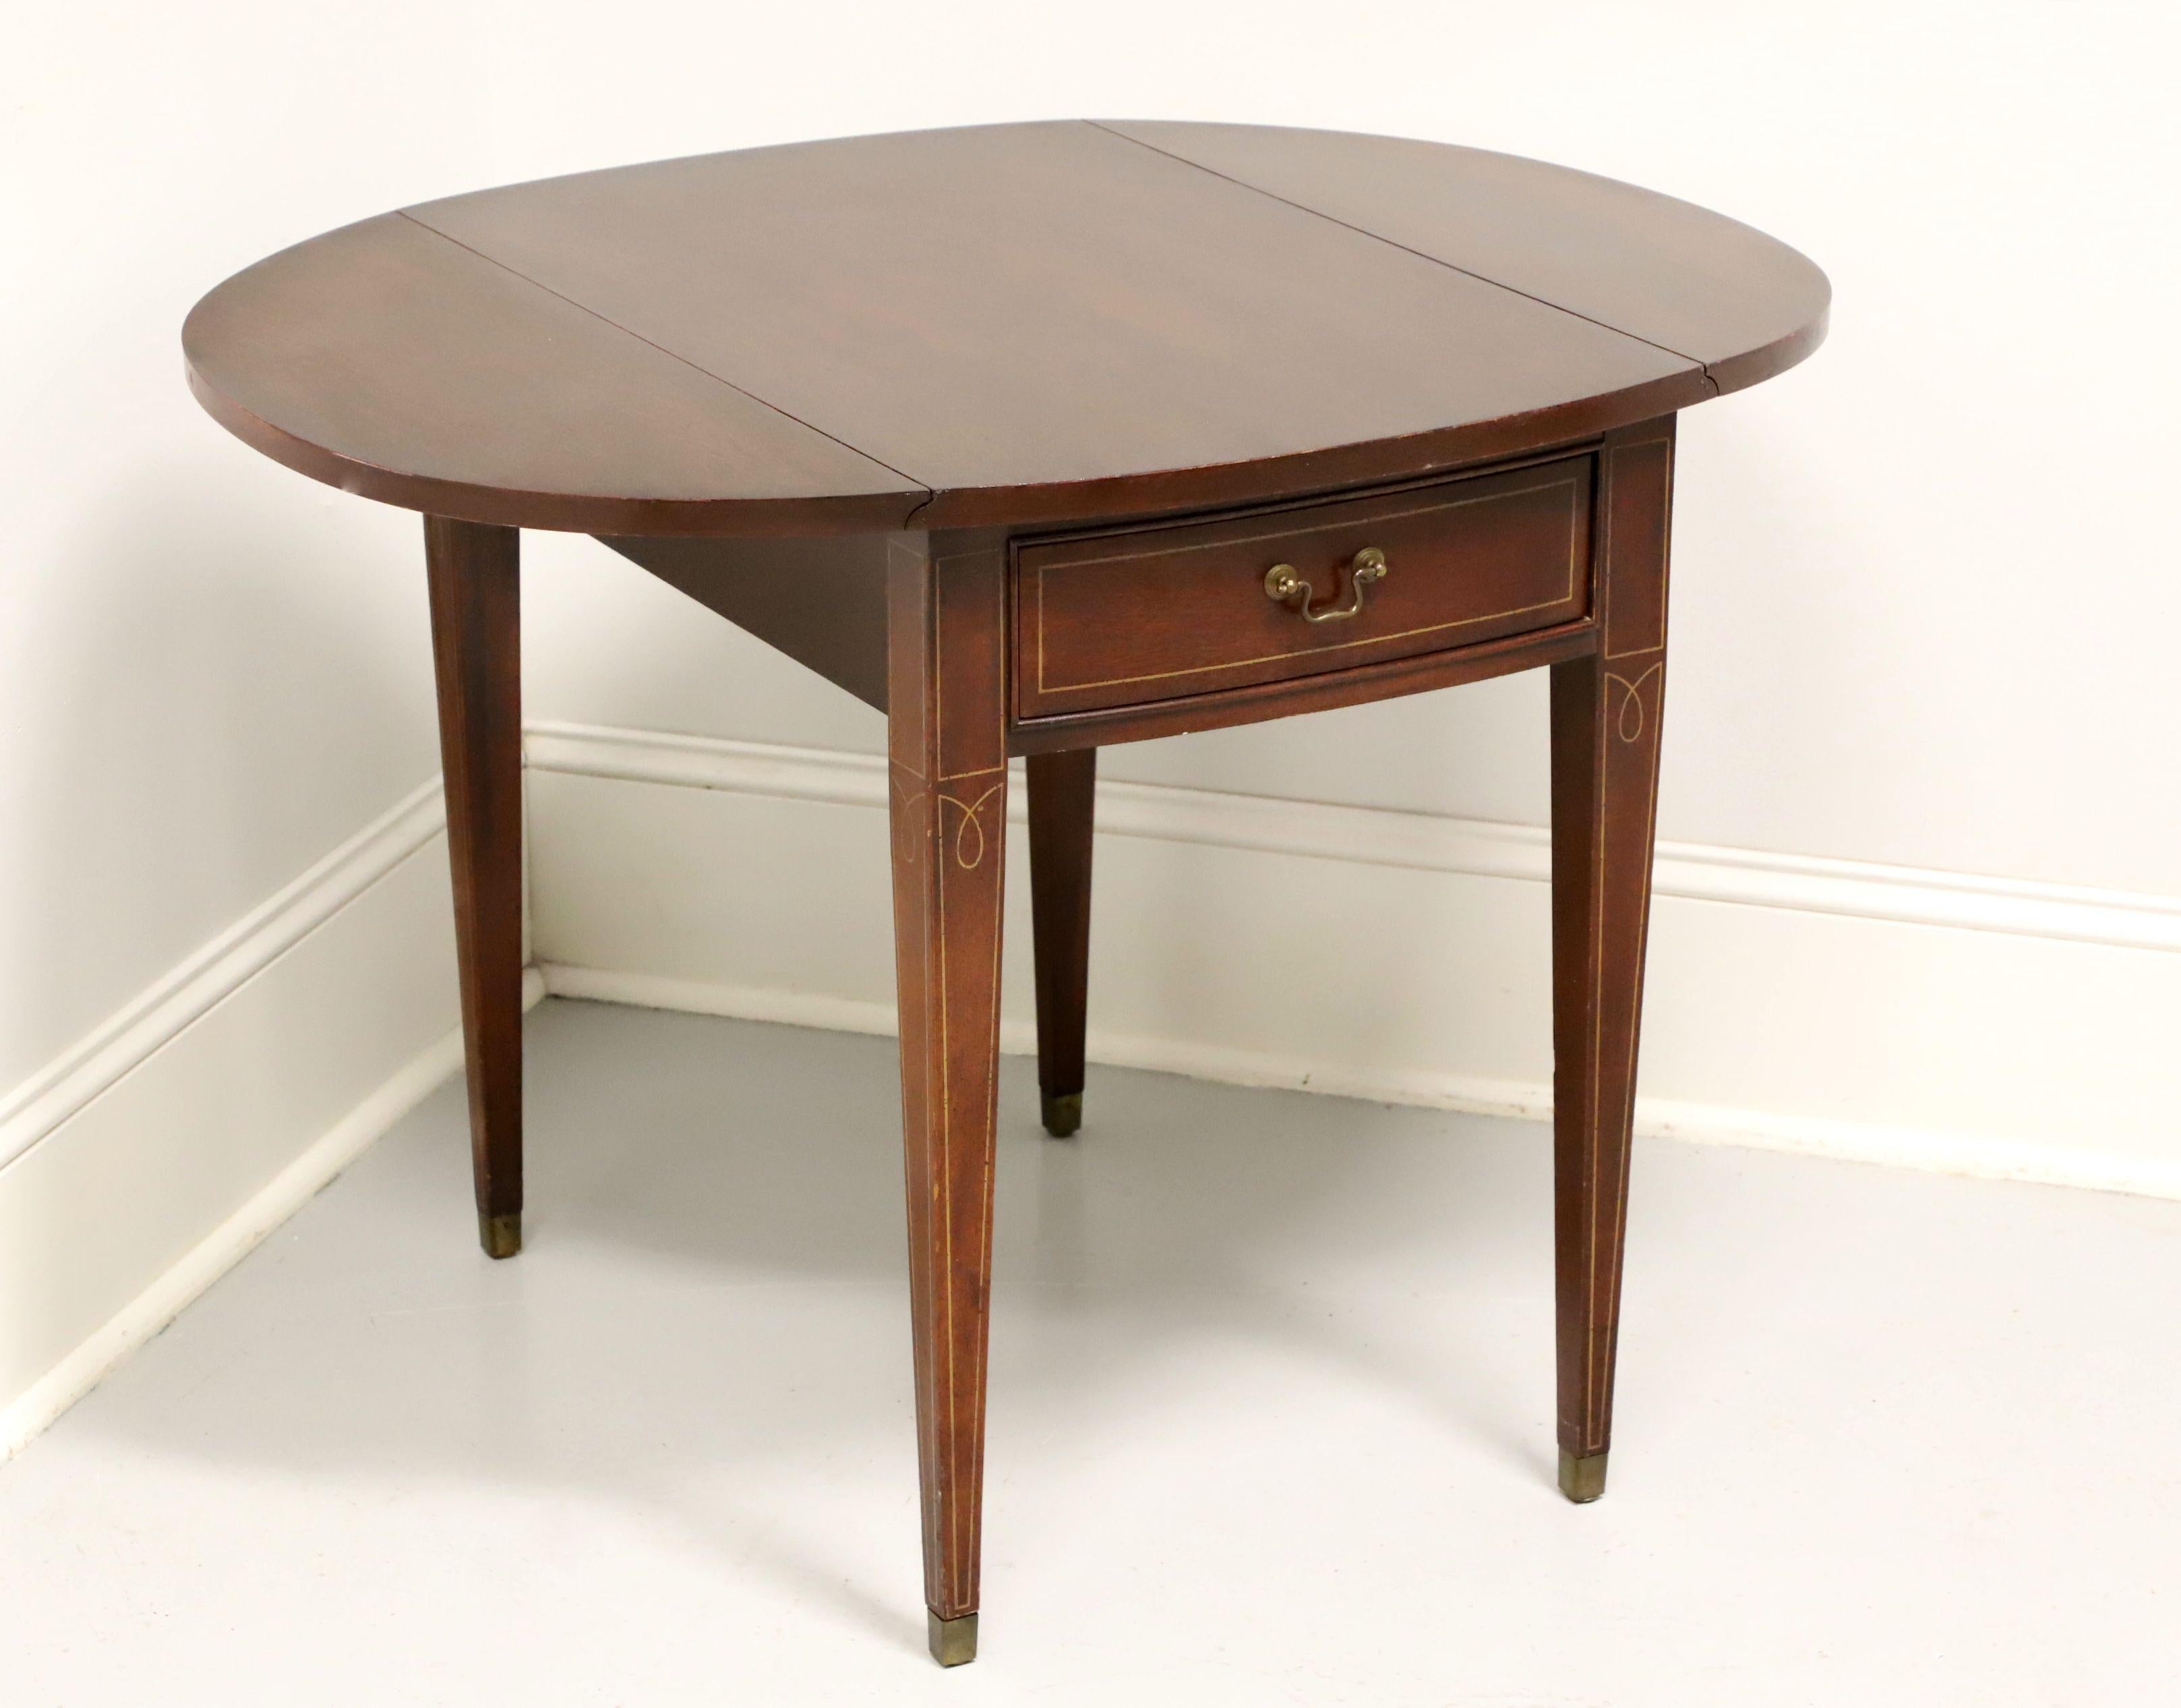 A Hepplewhite style Pembroke table, unbranded, similar in quality to Drexel and Hickory Chair. Mahogany with inlaid details, drop leaves, brass hardware, tapered straight legs and brass toe caps. Features one drawer of dovetail construction. Made in